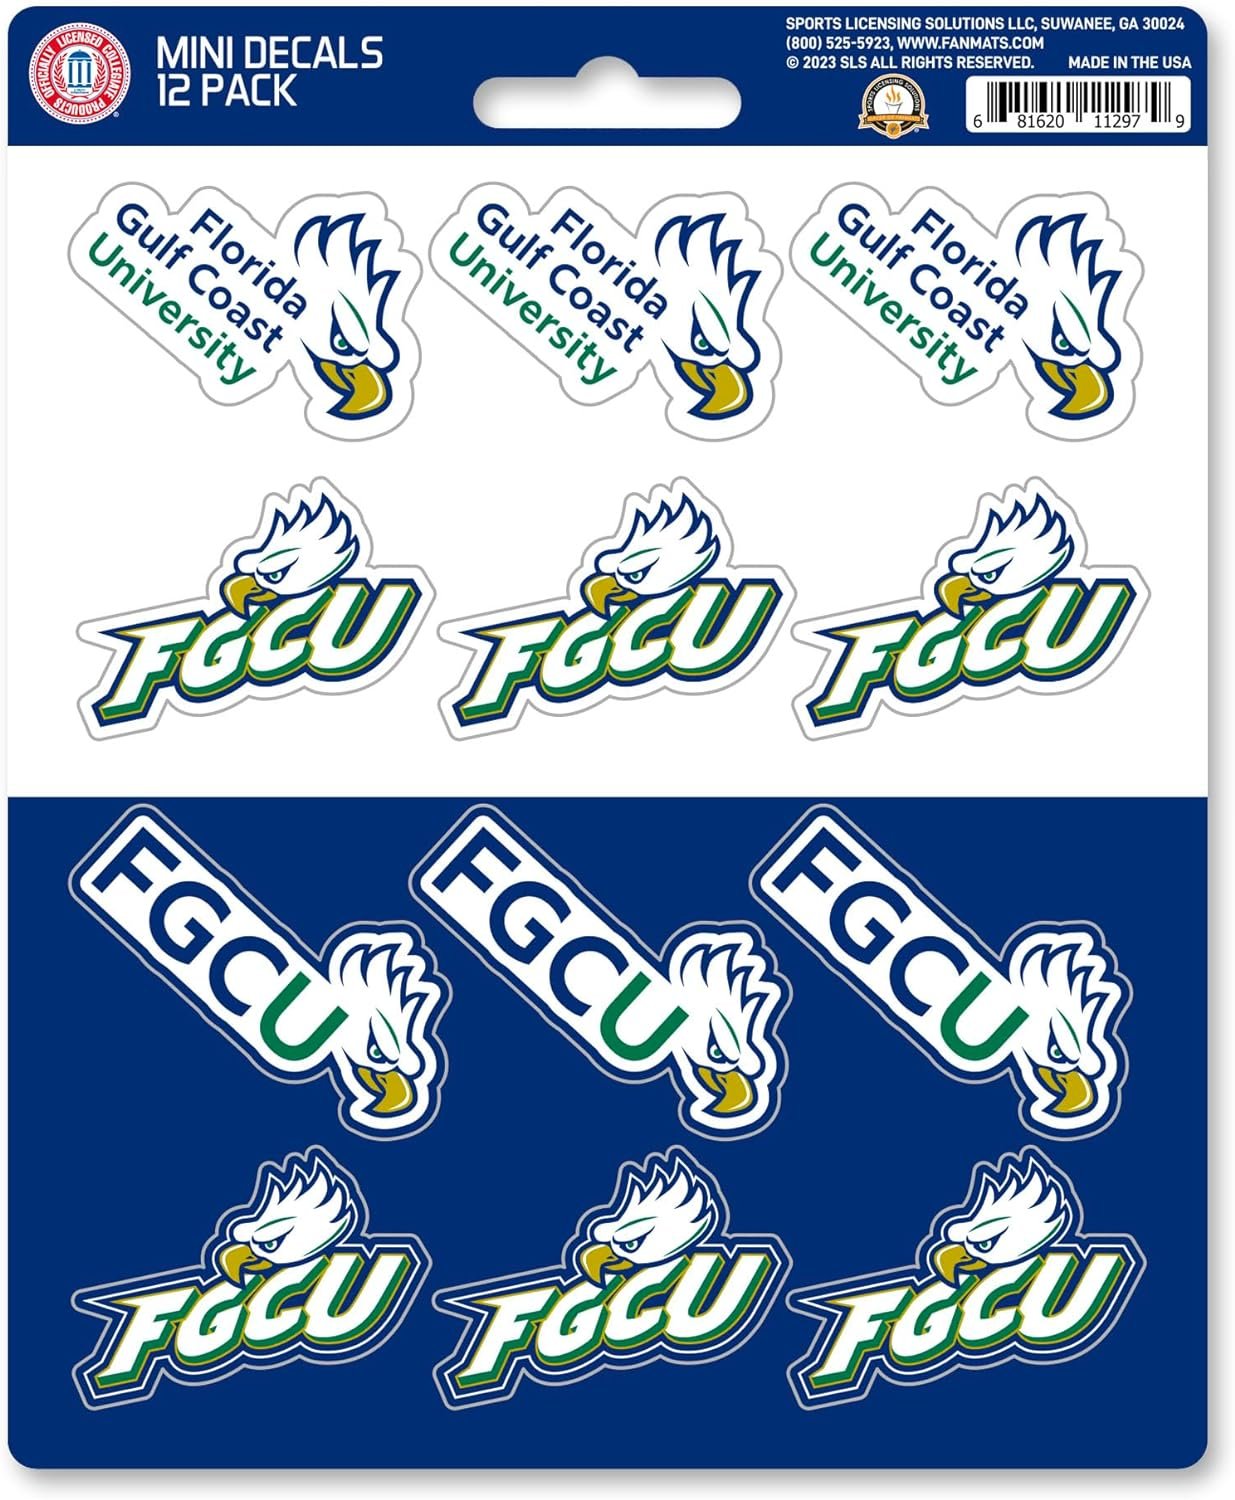 Florida Atlantic University Owls 12-Piece Mini Decal Sticker Set, 5x6 Inch Sheet, Gift for football fans for any hard surfaces around home, automotive, personal items